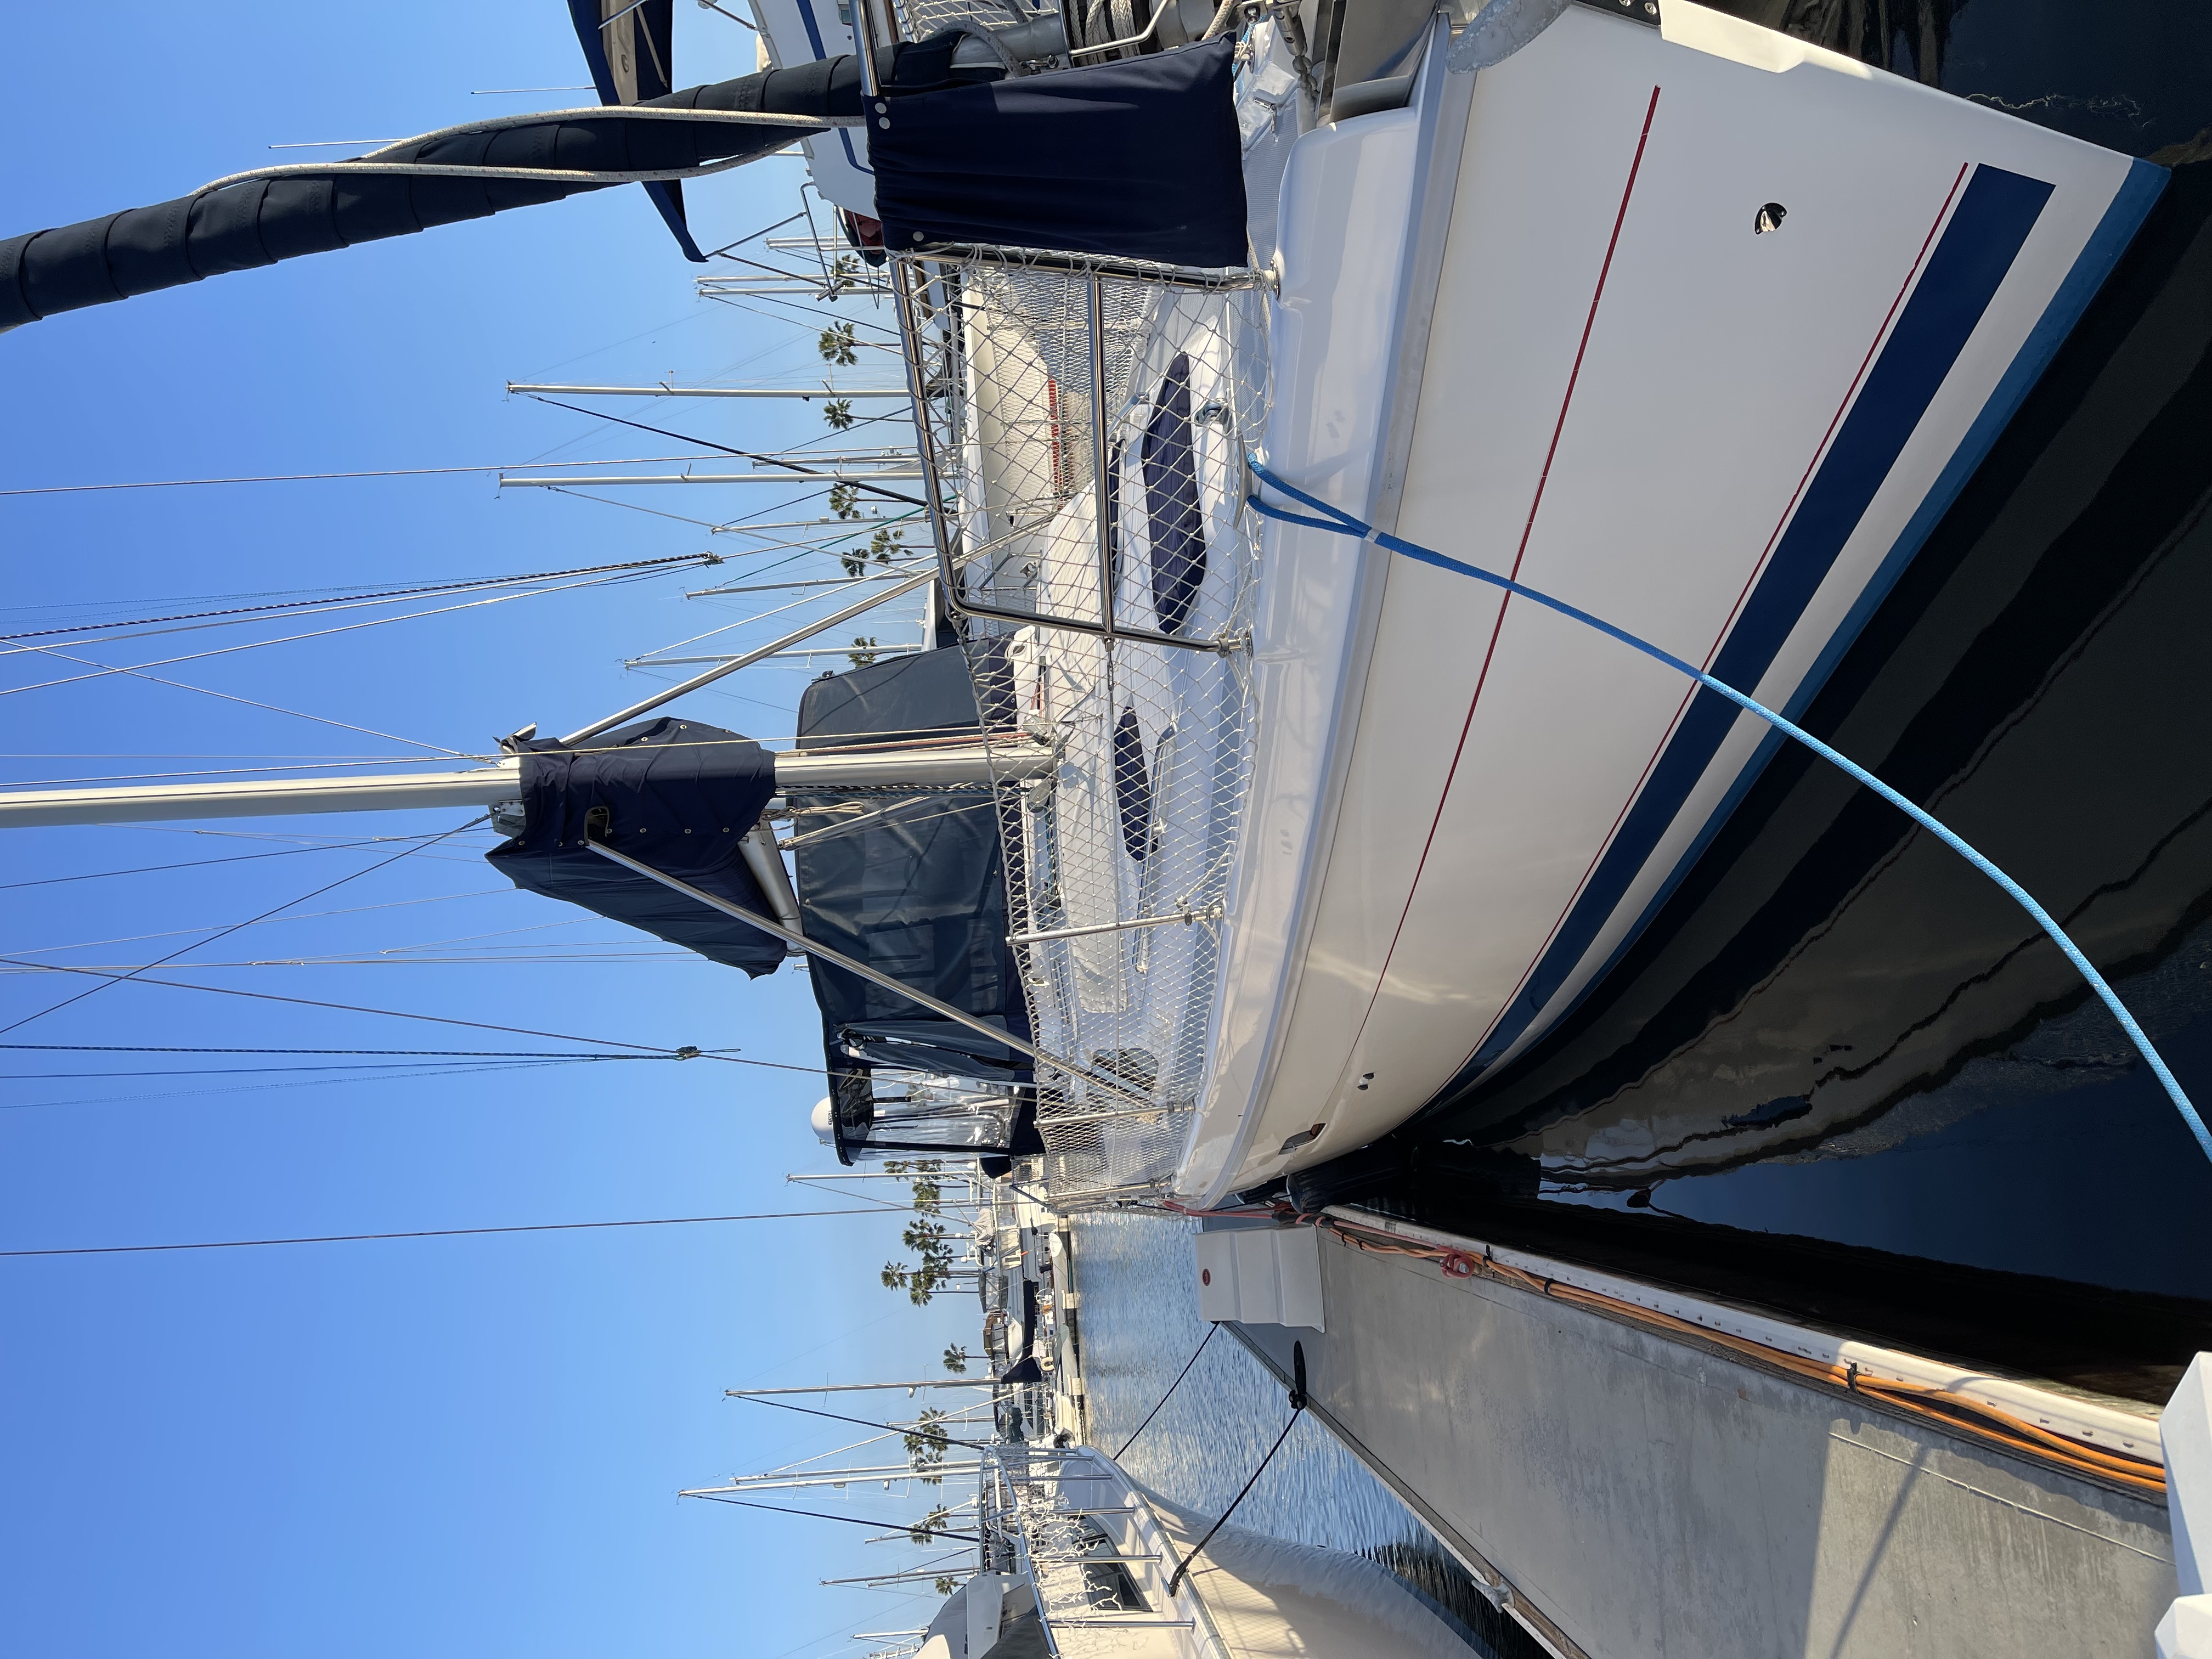 1998 Hunter Passage 450 Sailboat for sale in Long Beach, CA - image 5 